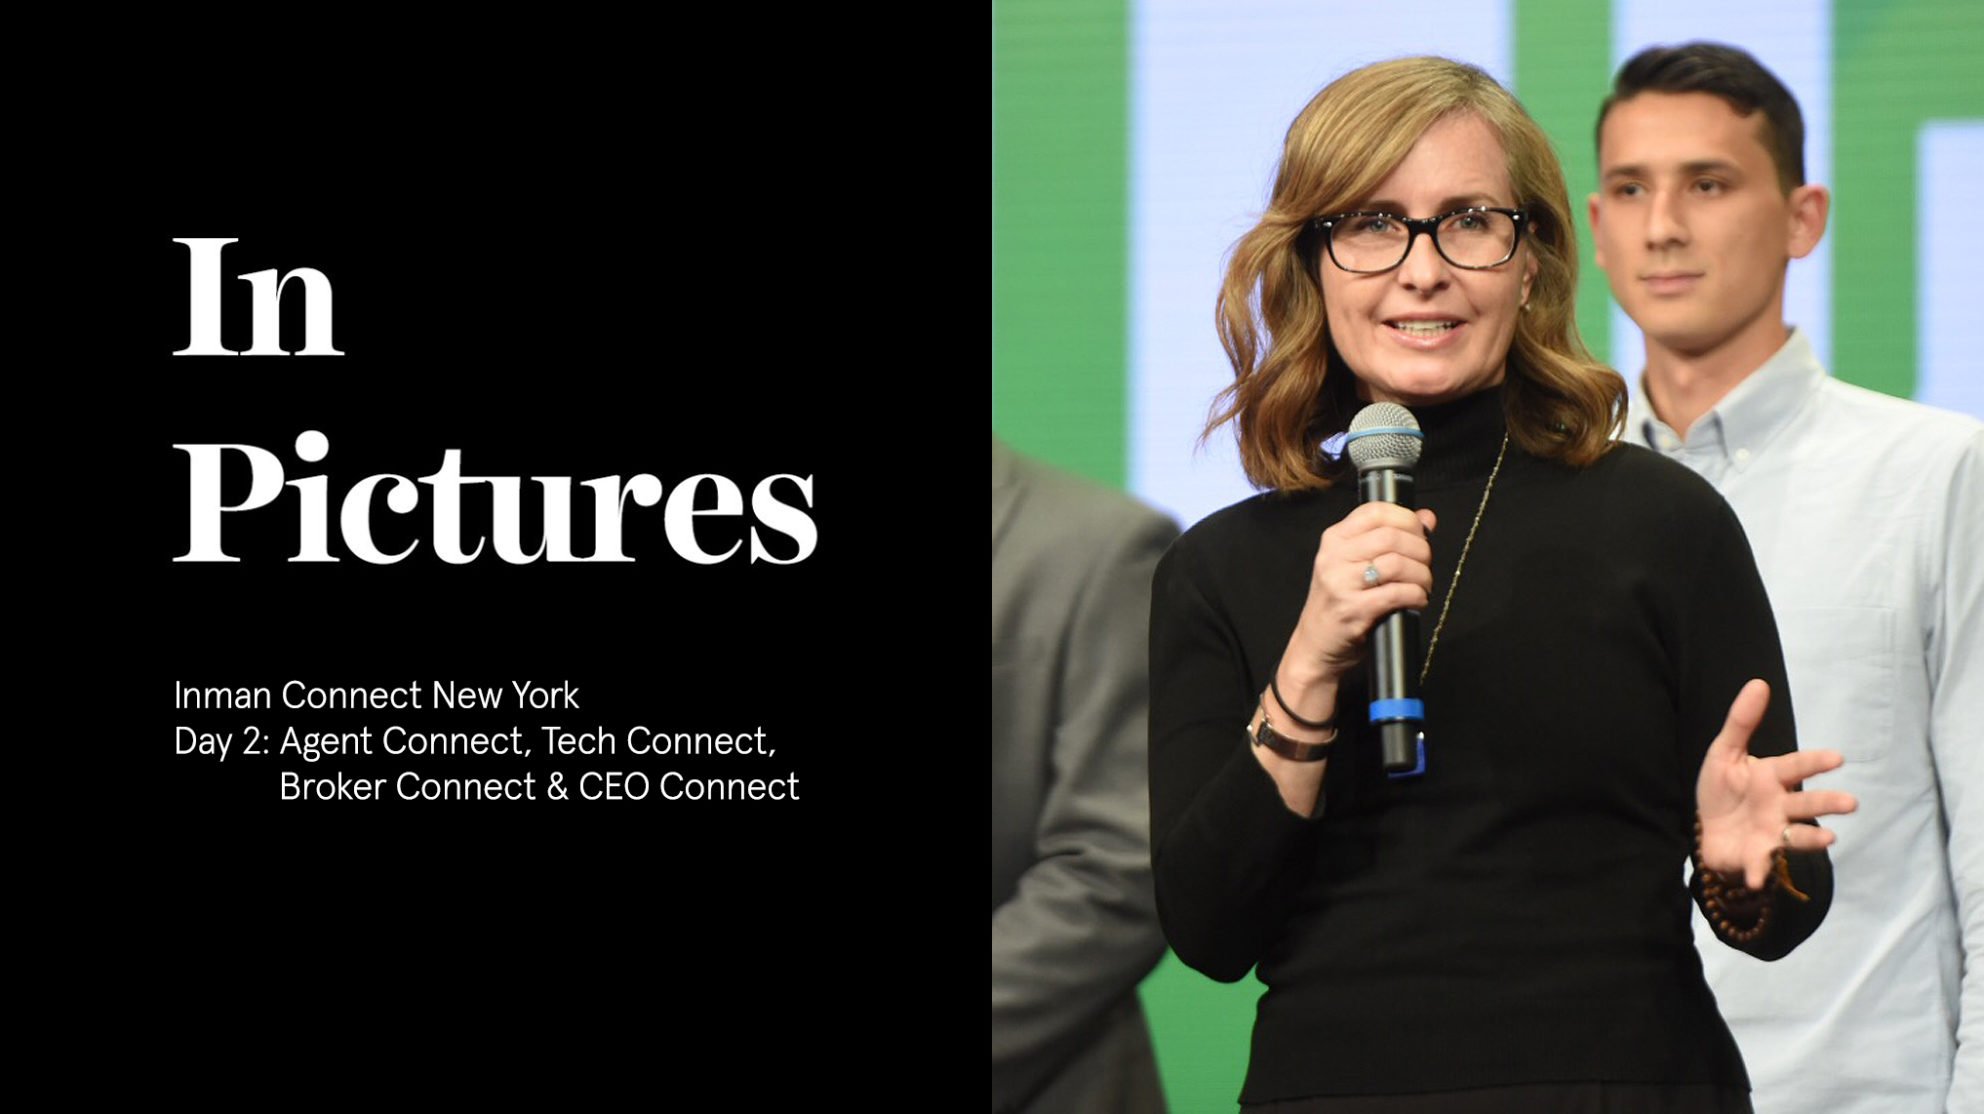 In Pictures: Inman Connect New York, Day 2